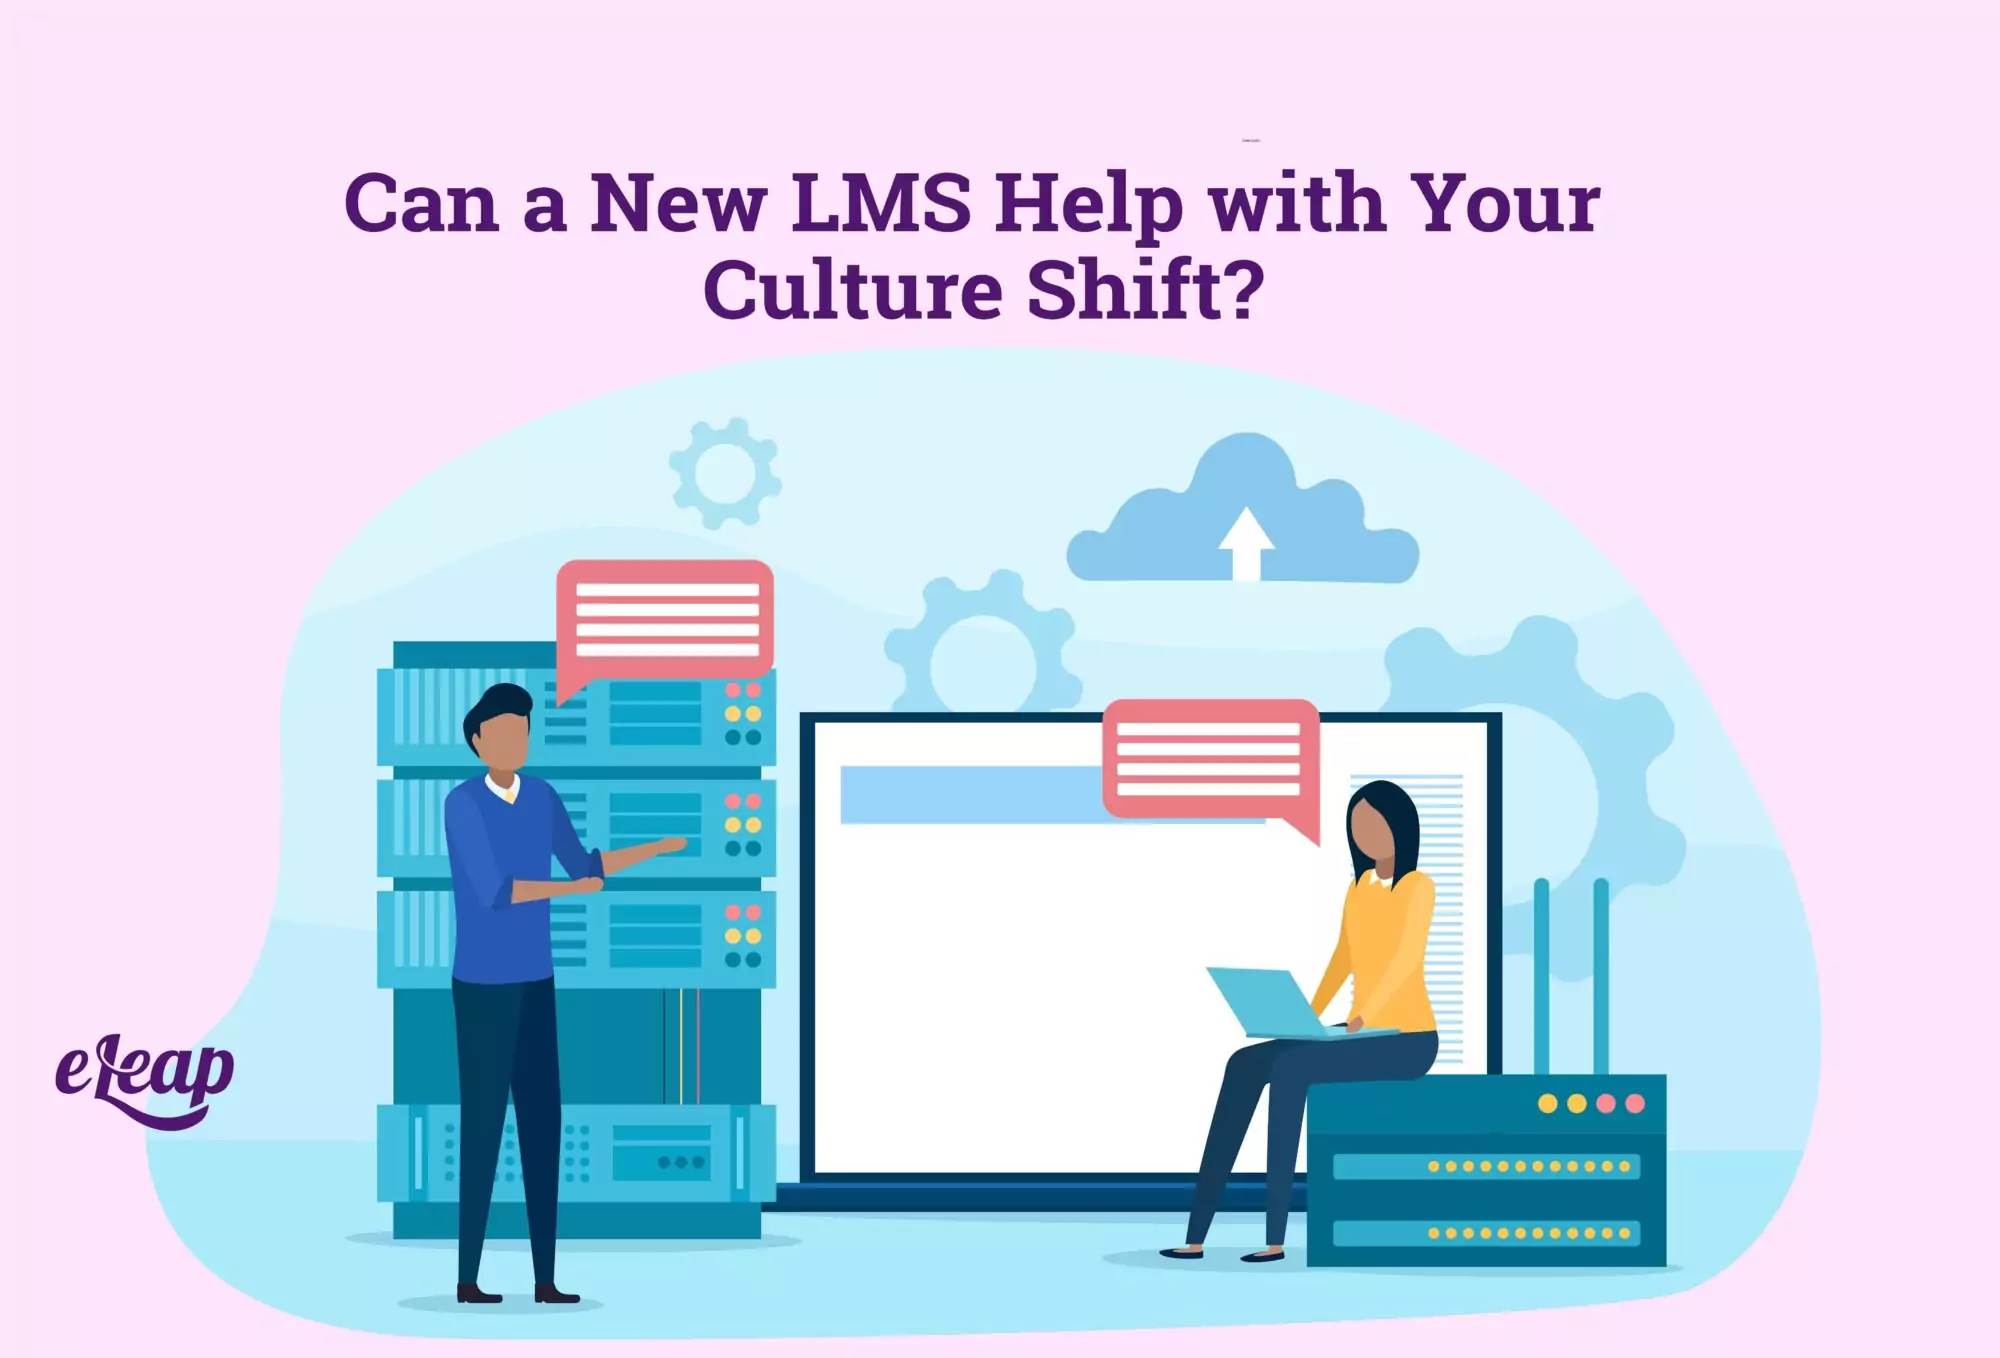 Can a New LMS Help with Your Culture Shift?